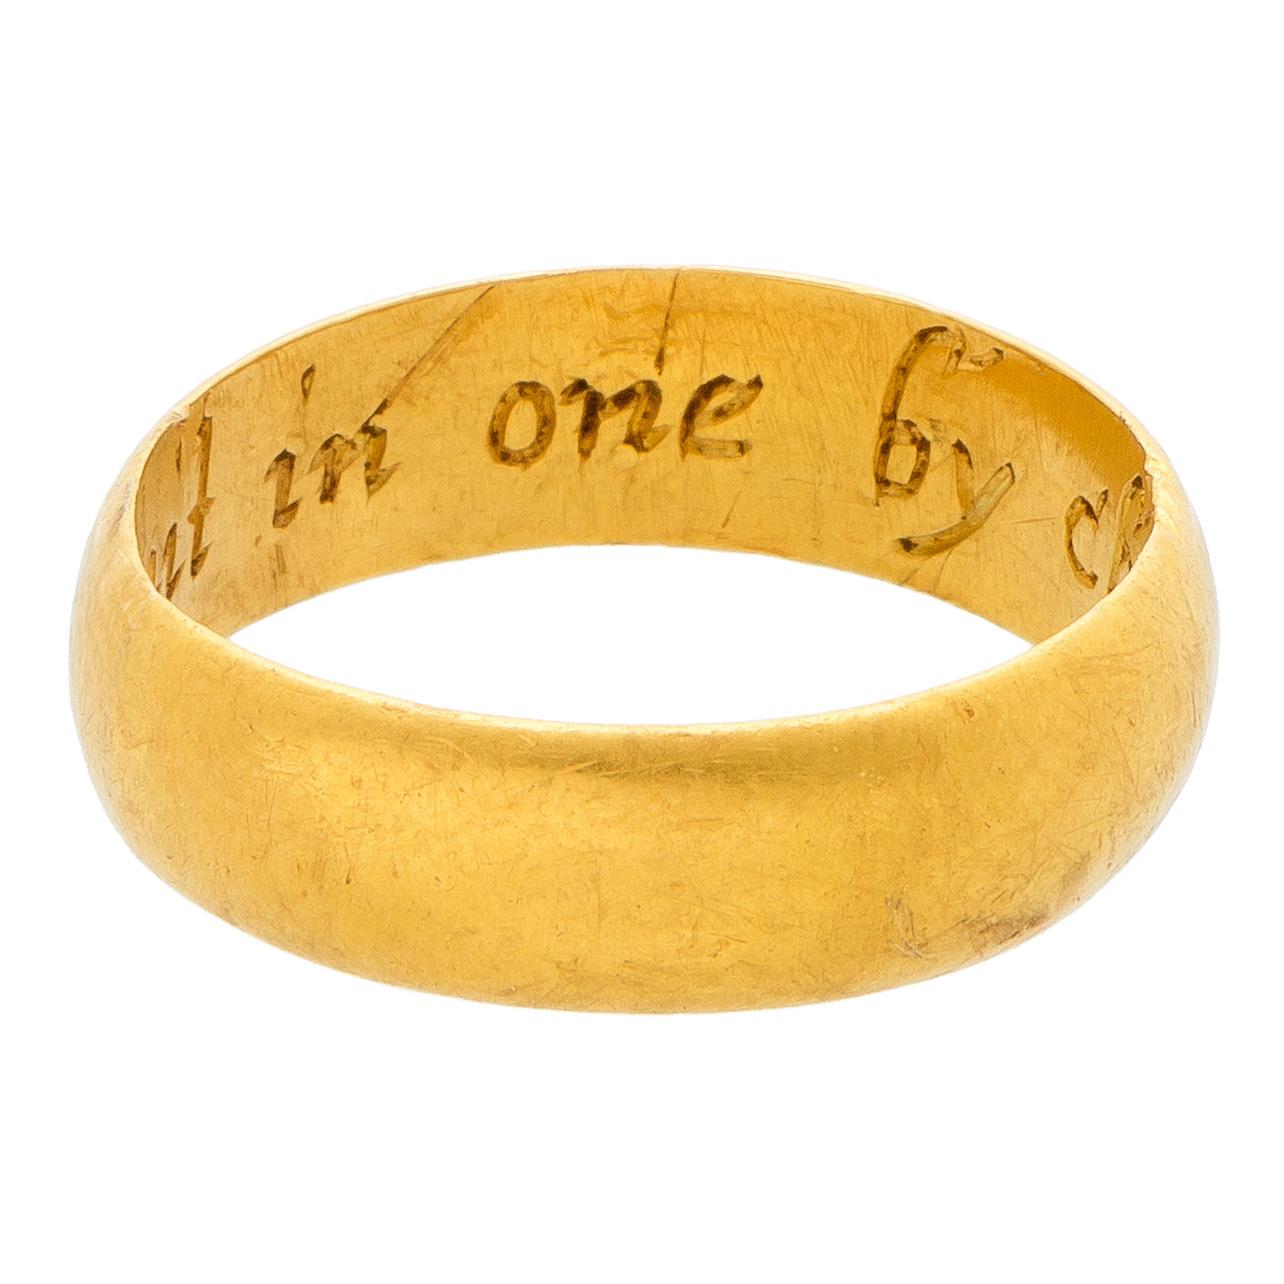 Posy Ring “Knit in one by christ alone” 
England, late 17th-early 18th century 
Gold 
Weight 5.1 gr.; circumference: 55.76 mm.; US size 7.5; UK size P

A wide gold band with D-section and inside the engraved inscription “Knit in one by Christ